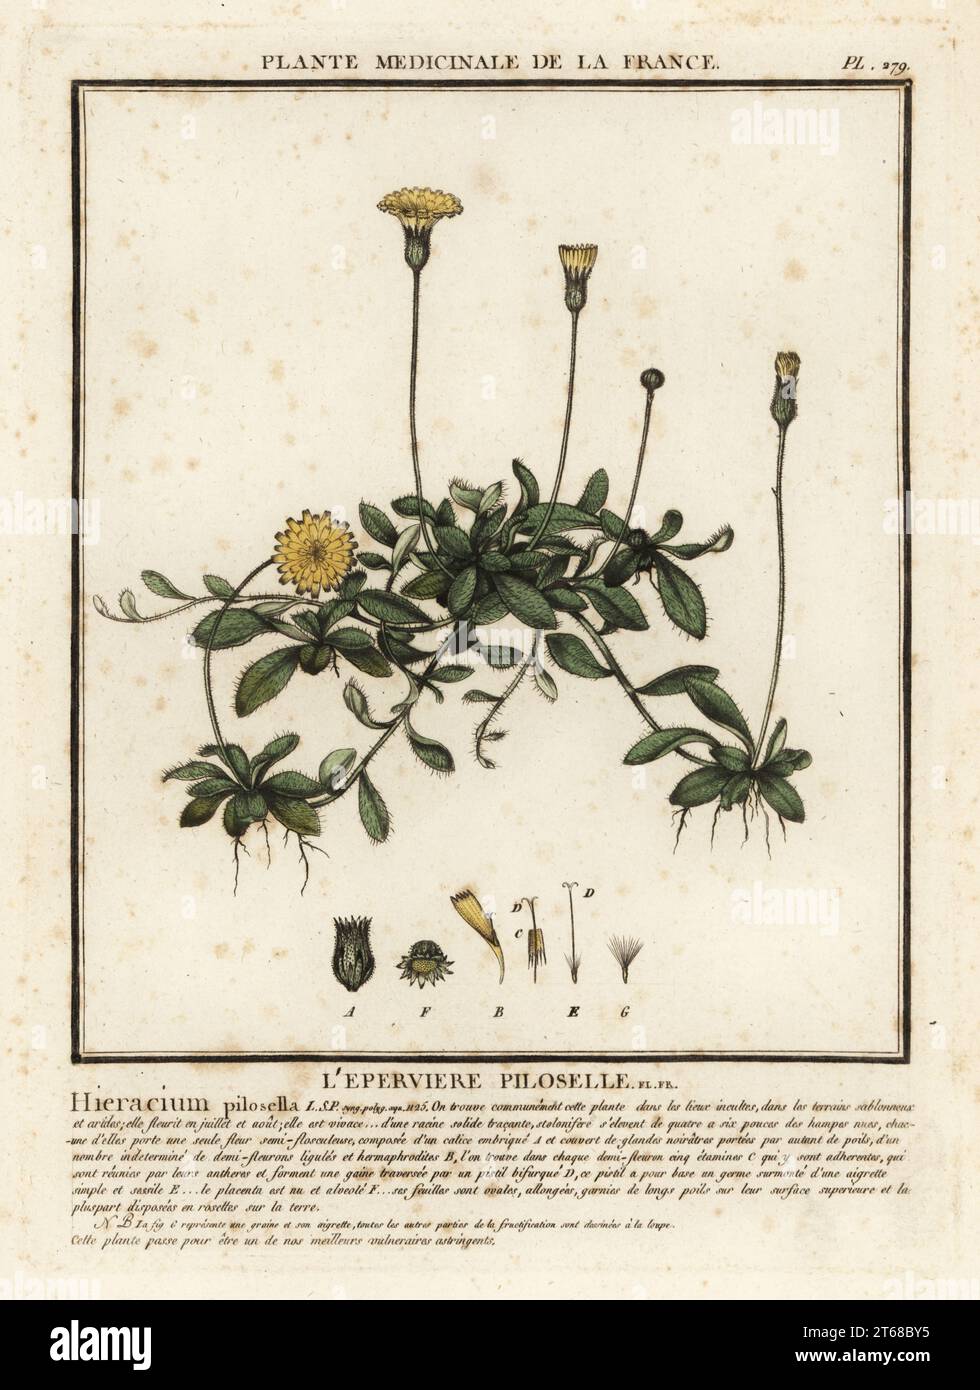 Mouse-ear hawkweed, Pilosella officinarum. Leperviere piloselle, Hieracium pilosella. Copperplate engraving printed in three colours by Pierre Bulliard from his Herbier de la France, ou collection complete des plantes indigenes de ce royaume, Didot jeune, Debure et Belin, 1780-1793. Stock Photo